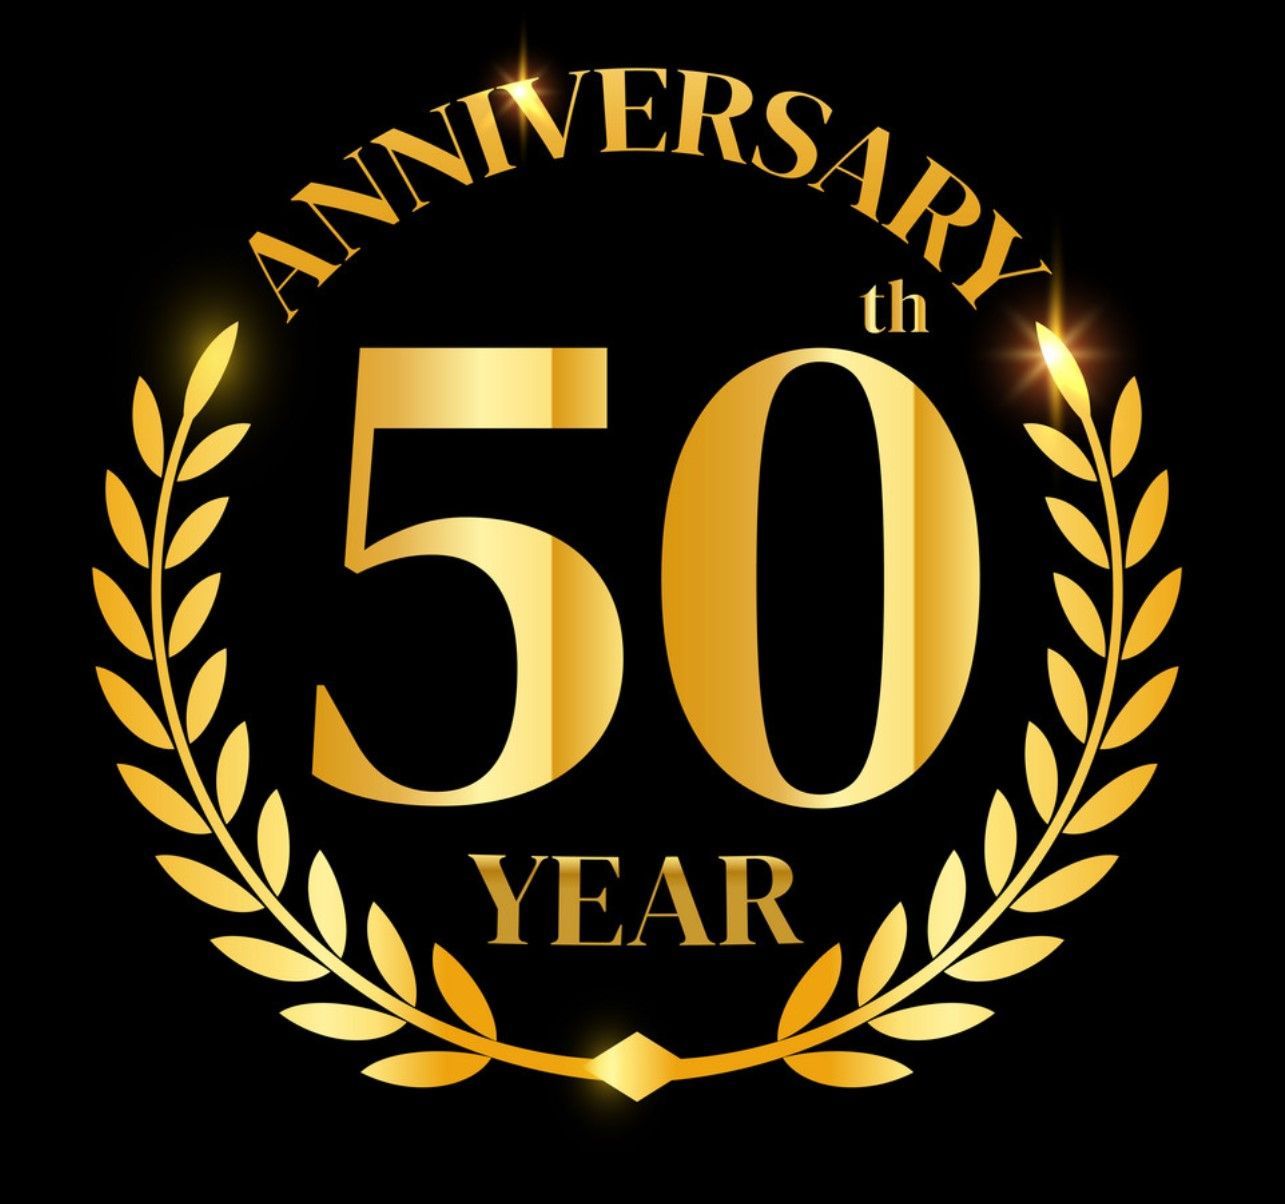 A gold 50th anniversary logo with a laurel wreath